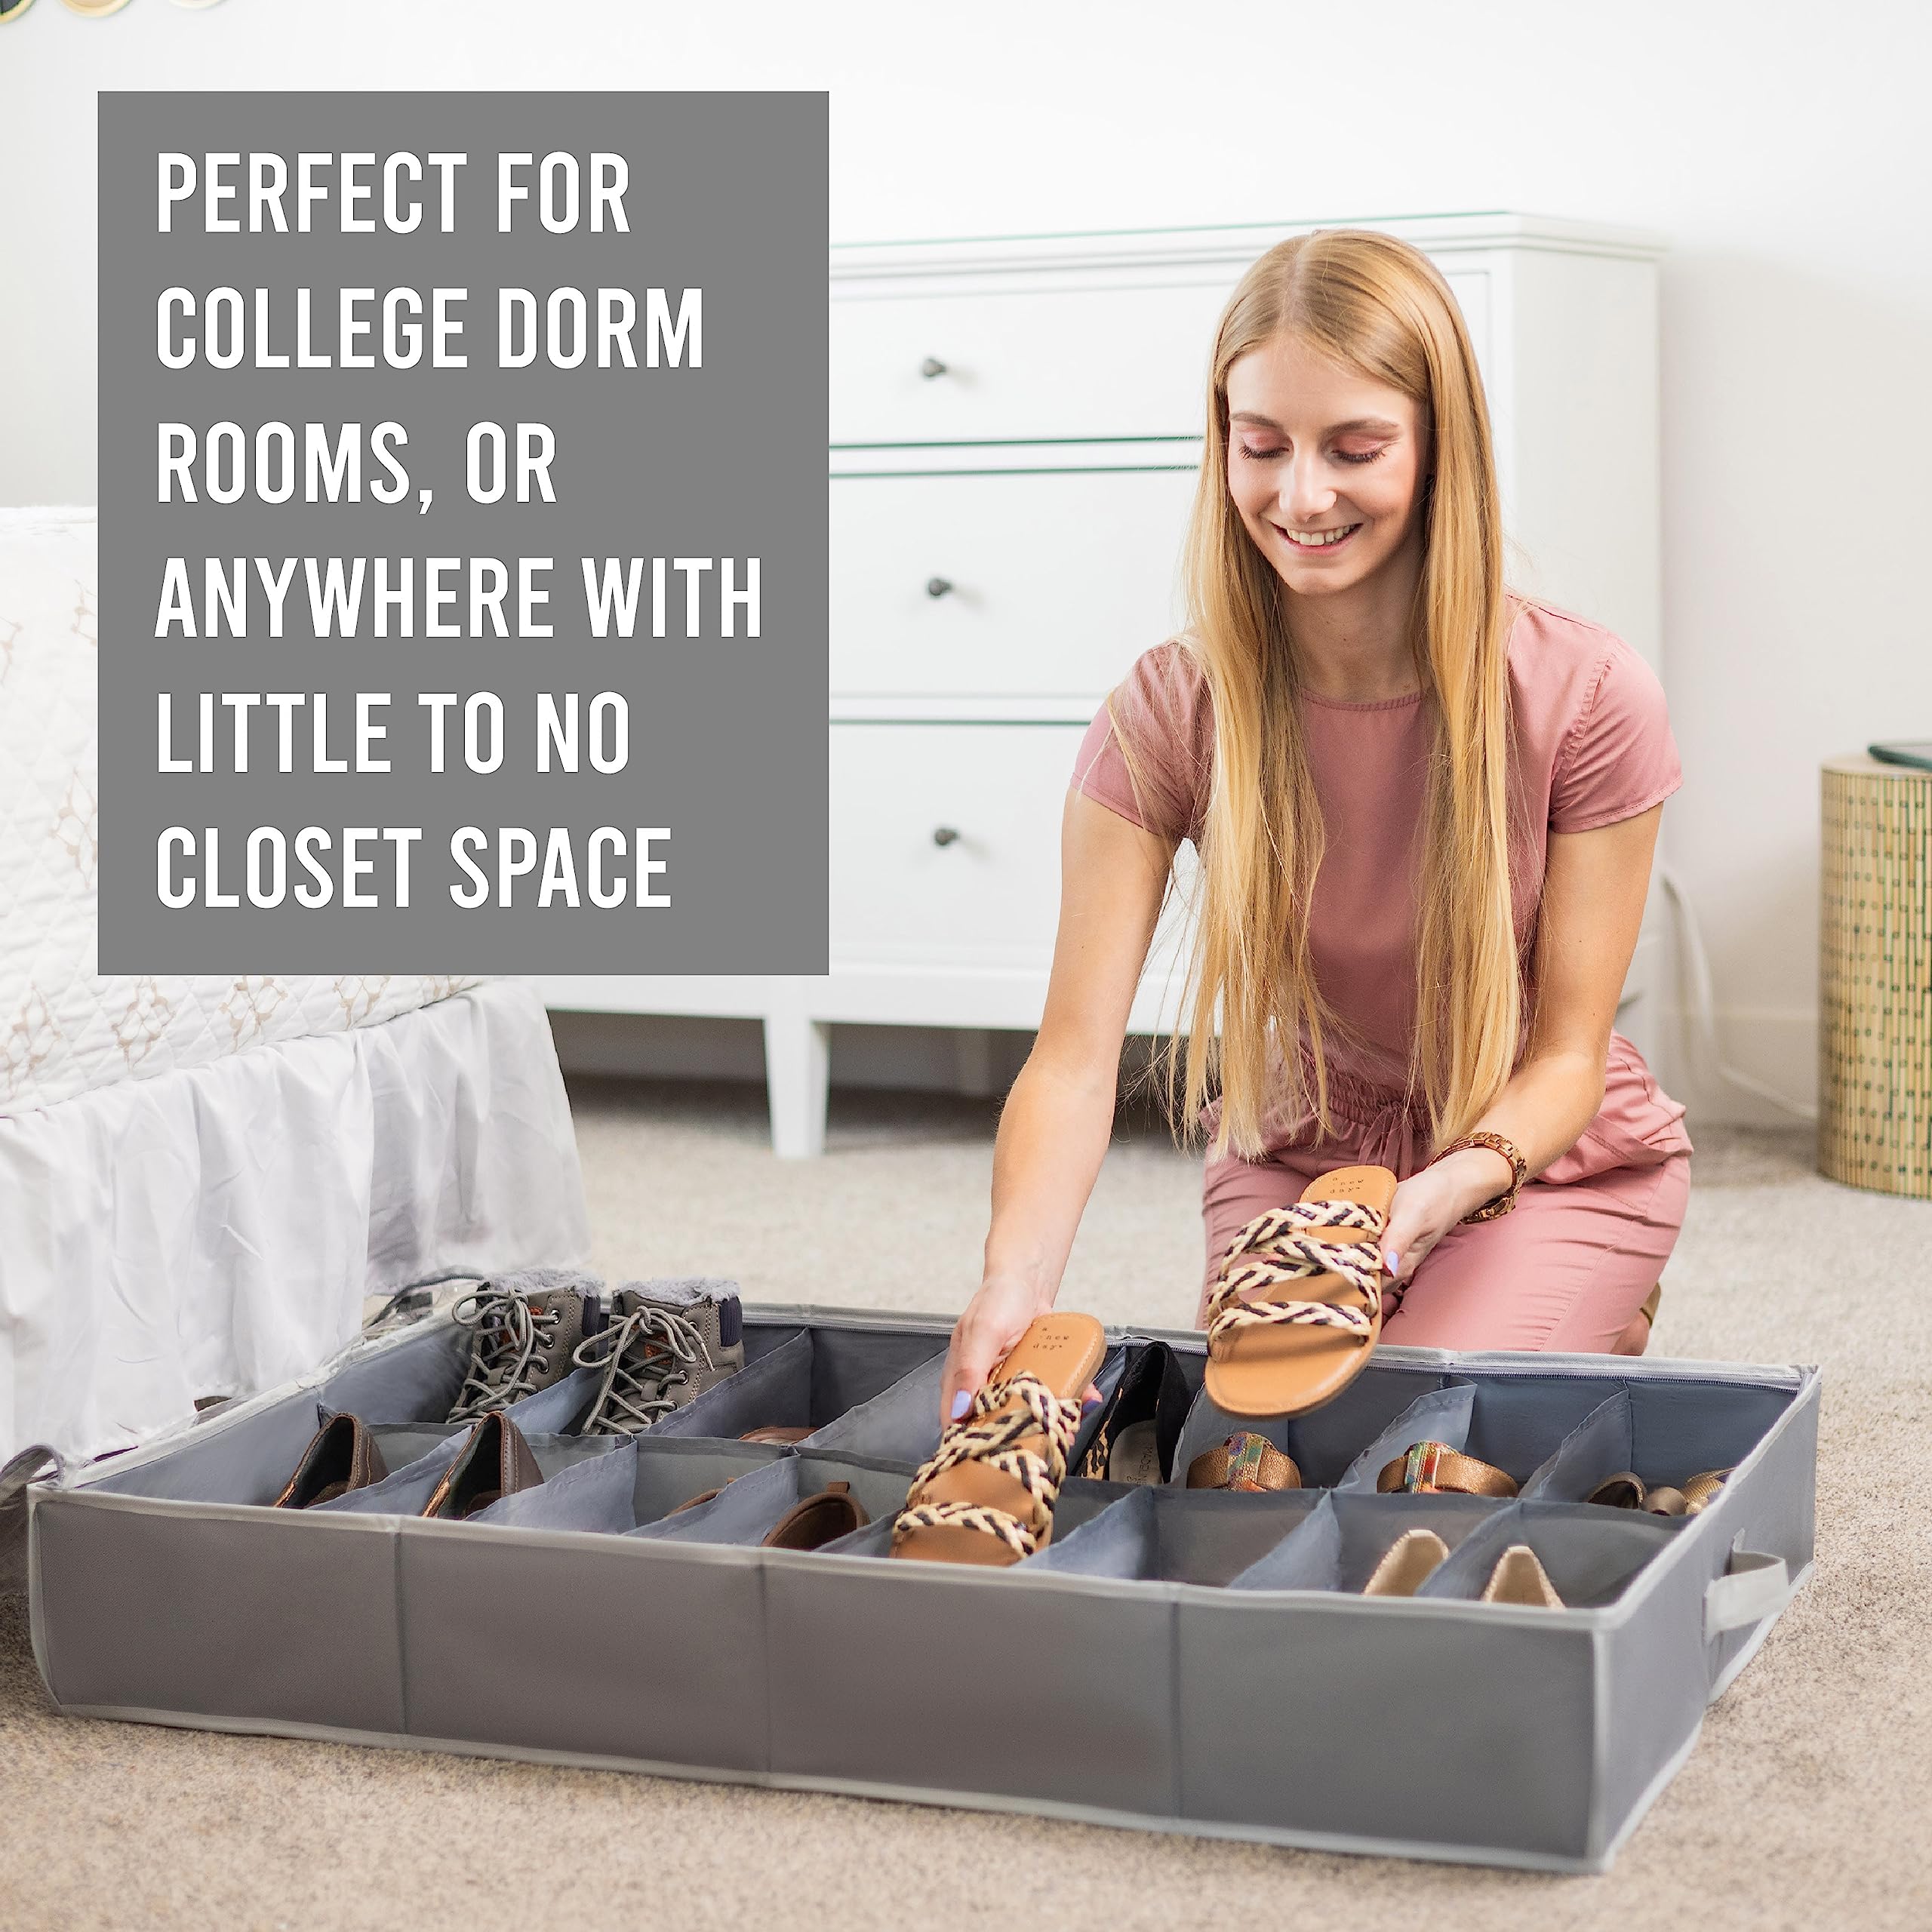 Under Bed Shoe Storage Organizer - TEAR-RESISTANT Heavy Duty 600D Material - Fits All Styles Men's and Women's Shoes, Up to 16 Pairs - Extra-Strong Zipper - Grey - Perfect for College Dorms  - Like New